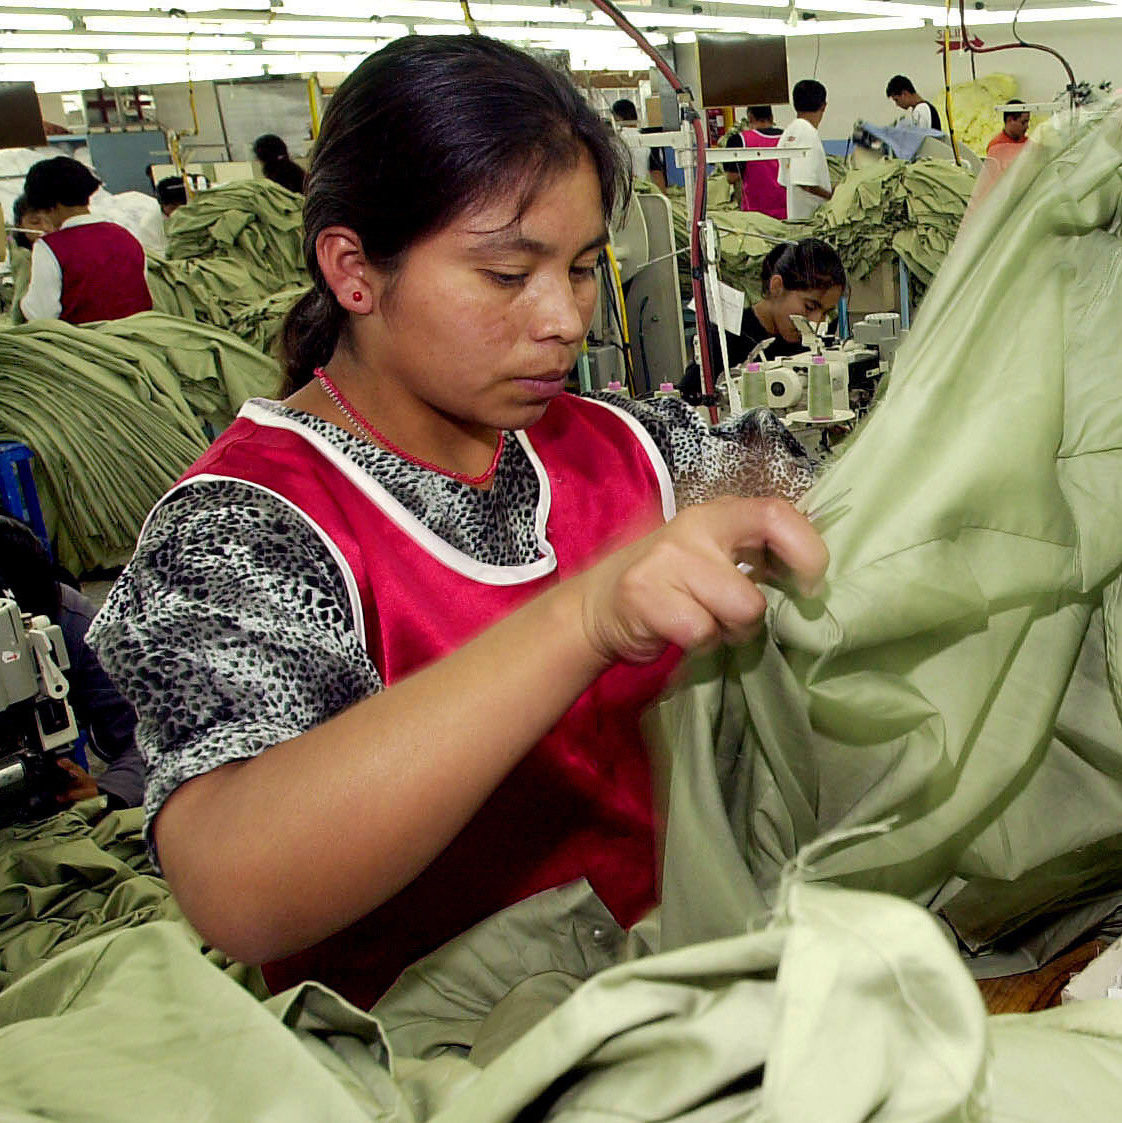 The Cambodians Who Stitch Your Clothing Keep Fainting In Droves